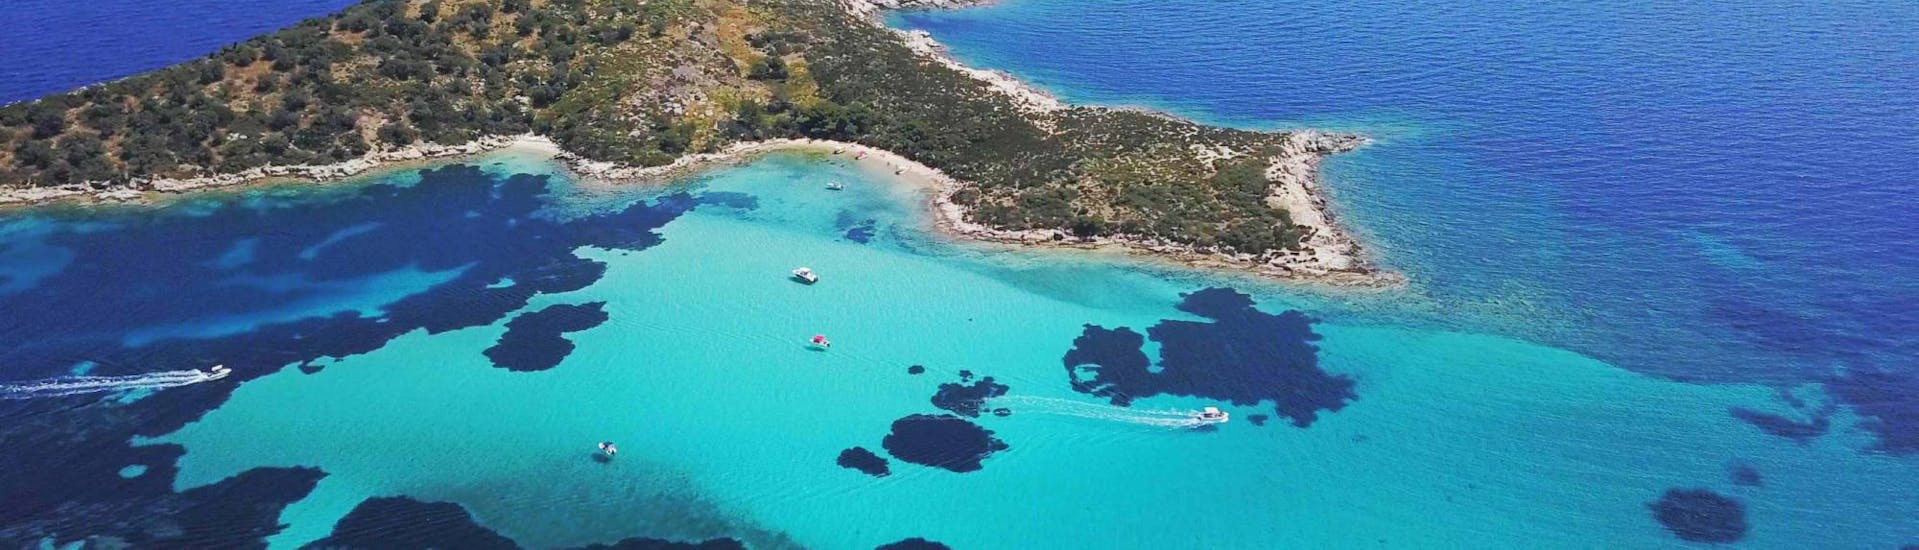 Blue Lagoon during the Private Boat Trip to Blue Lagoon with Swimming - Full Day with Luxury Sport Cruise Halkidiki.